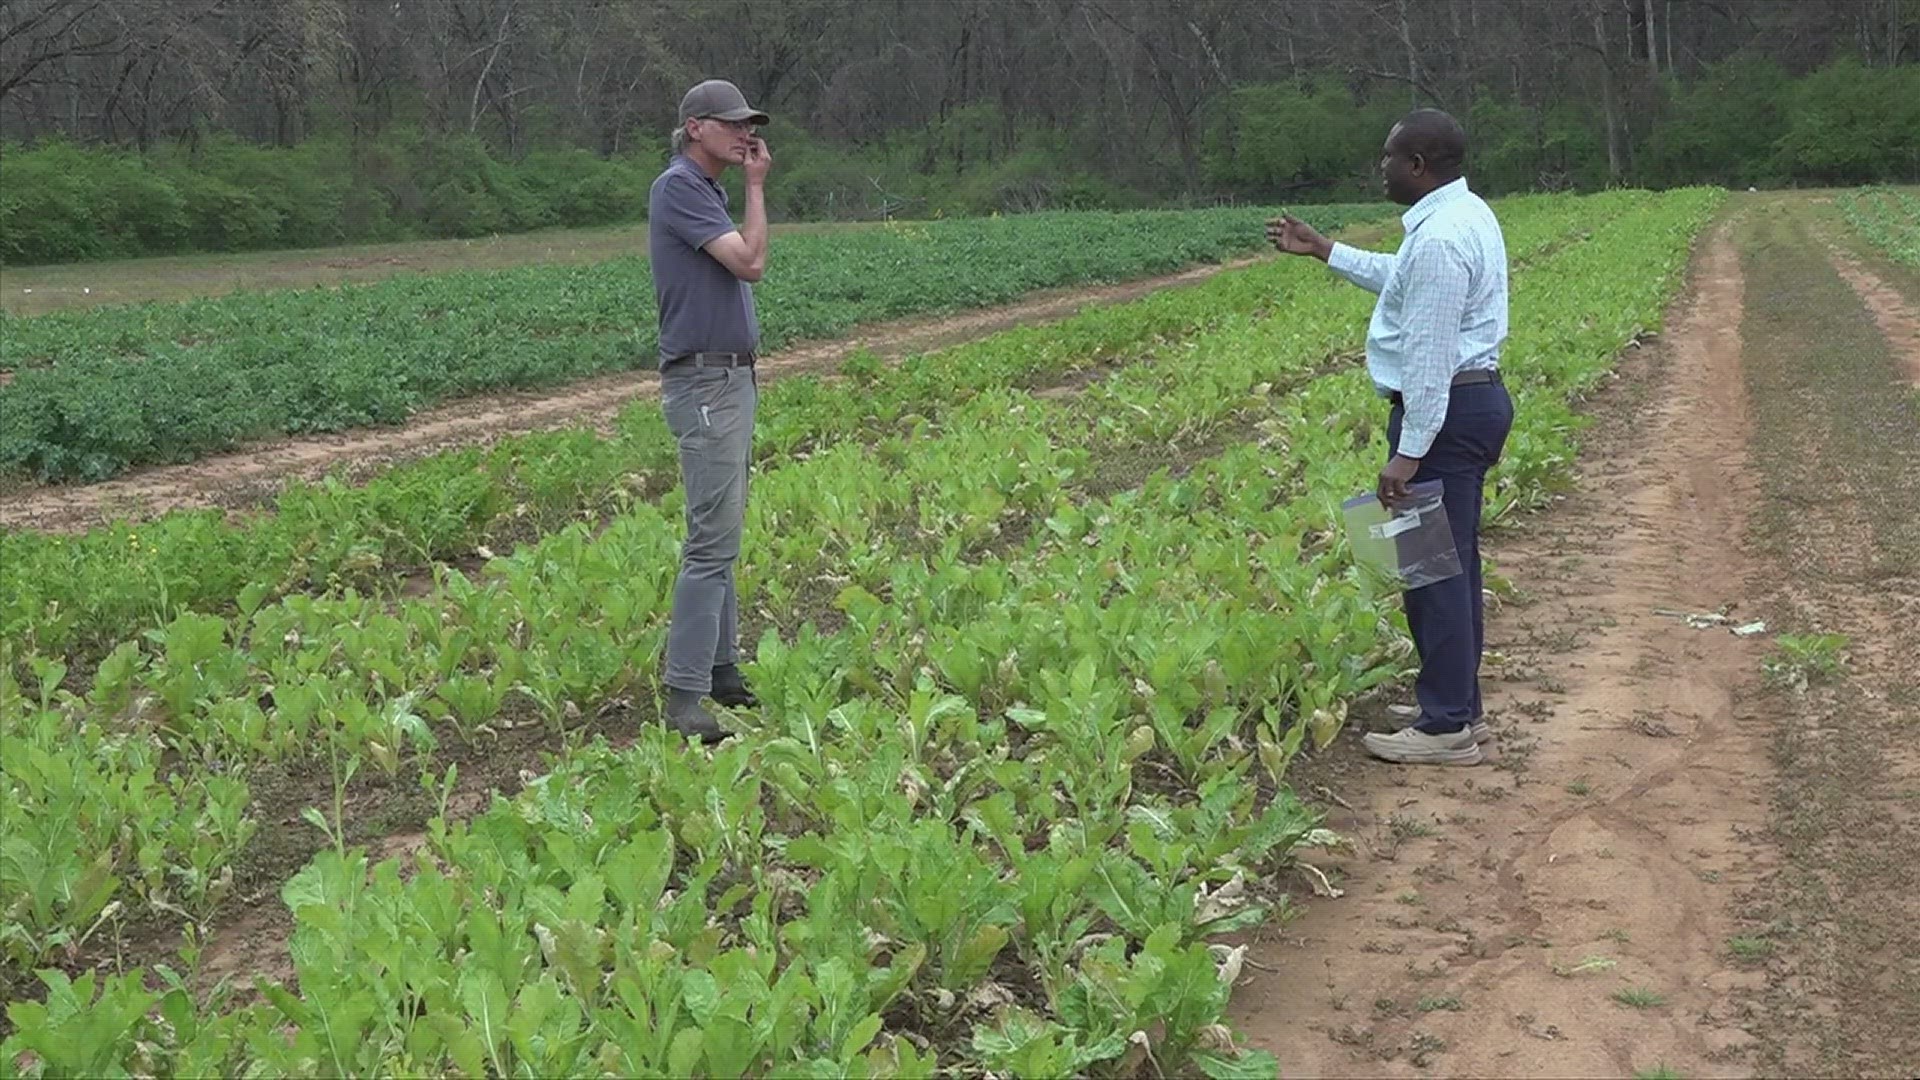 Take your pick from the vegetable patch thanks to this partnership between AAMU and the Madison County Commission.